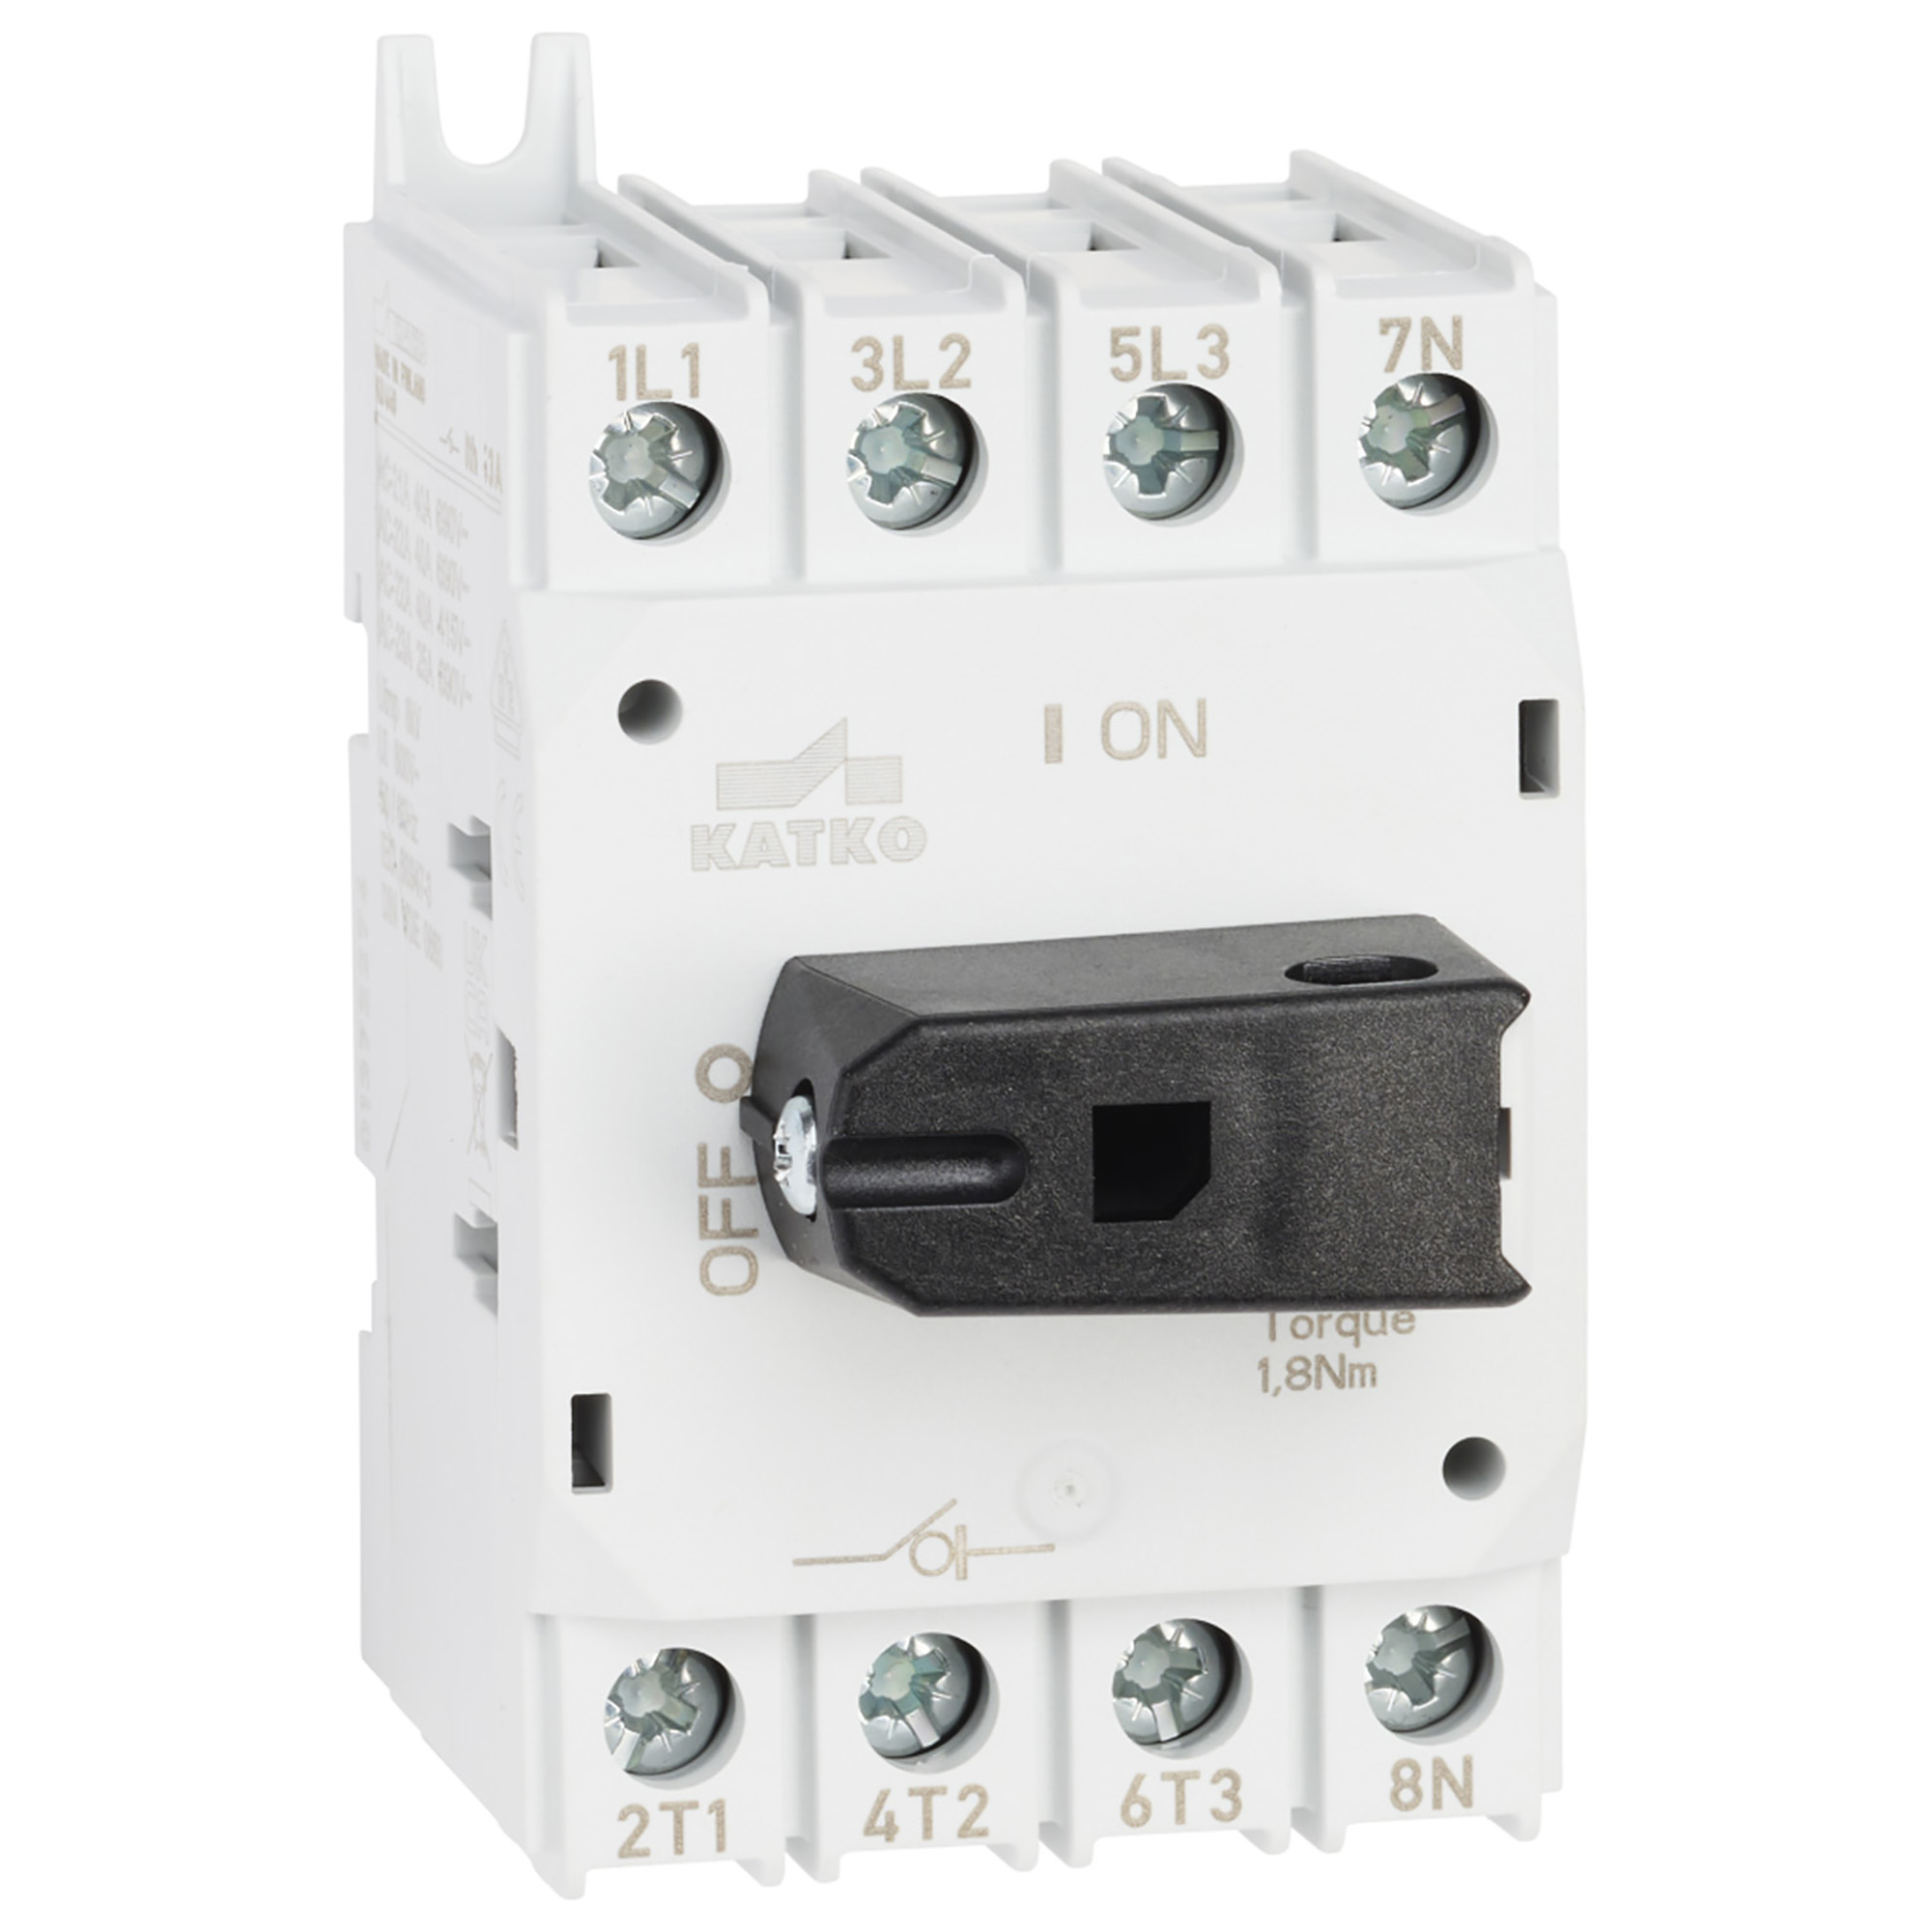 62-KU 416 KU 16-160A 3- and 4-pole IN/OUT, compact, suitable for DIN-EN rail. The 4-pole version is also available with early-make and late-break neutral pole. The silver contactsensures safe and durable operation. Series KU modular design.